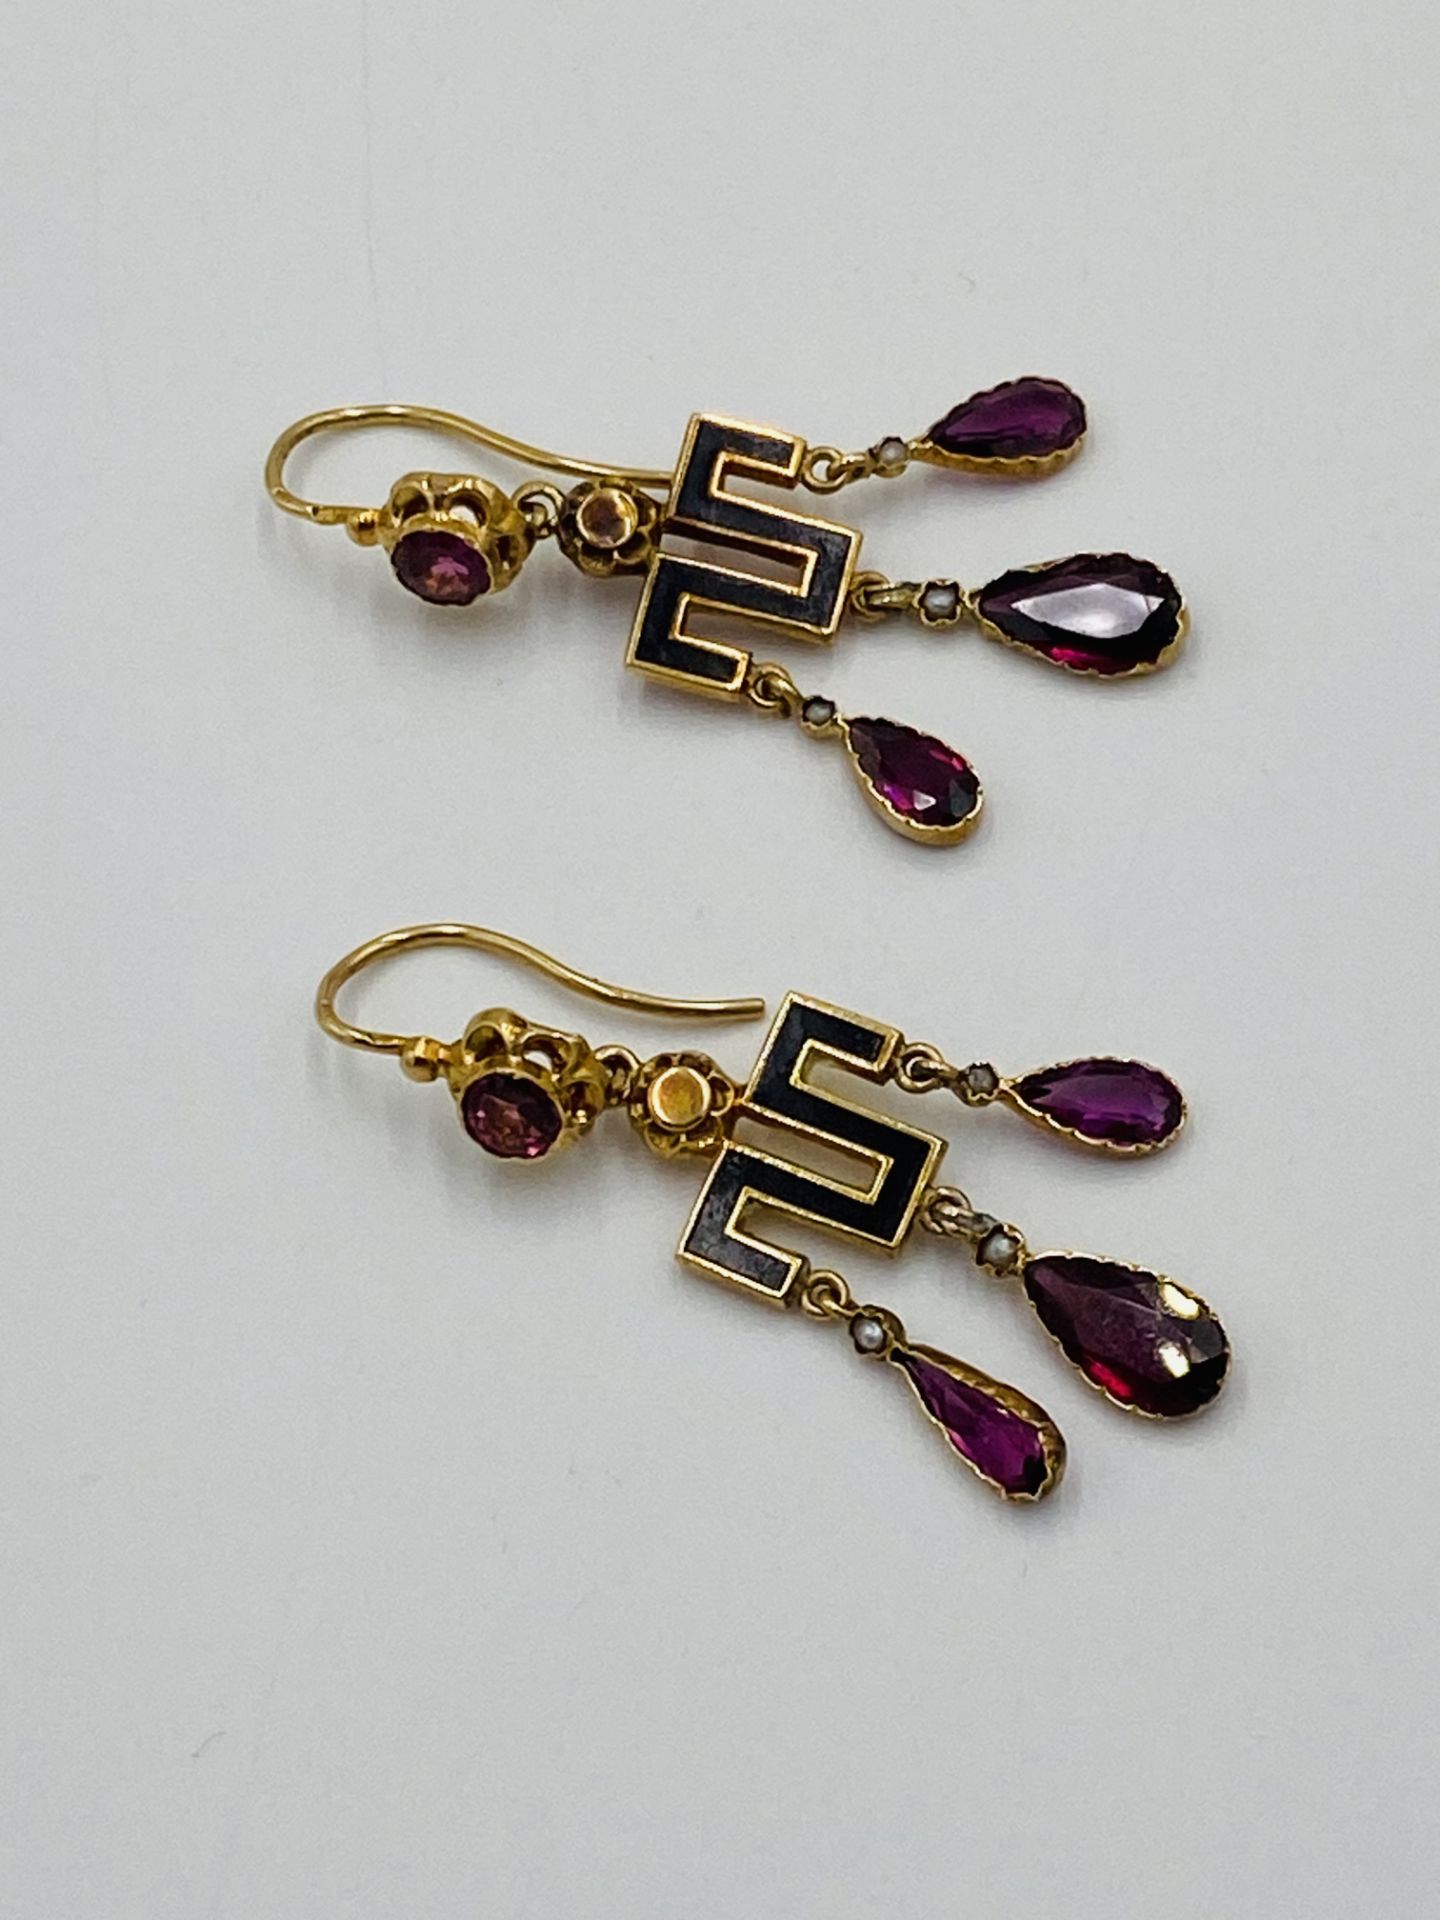 18ct gold, amethyst and seed pearl earrings - Image 2 of 4